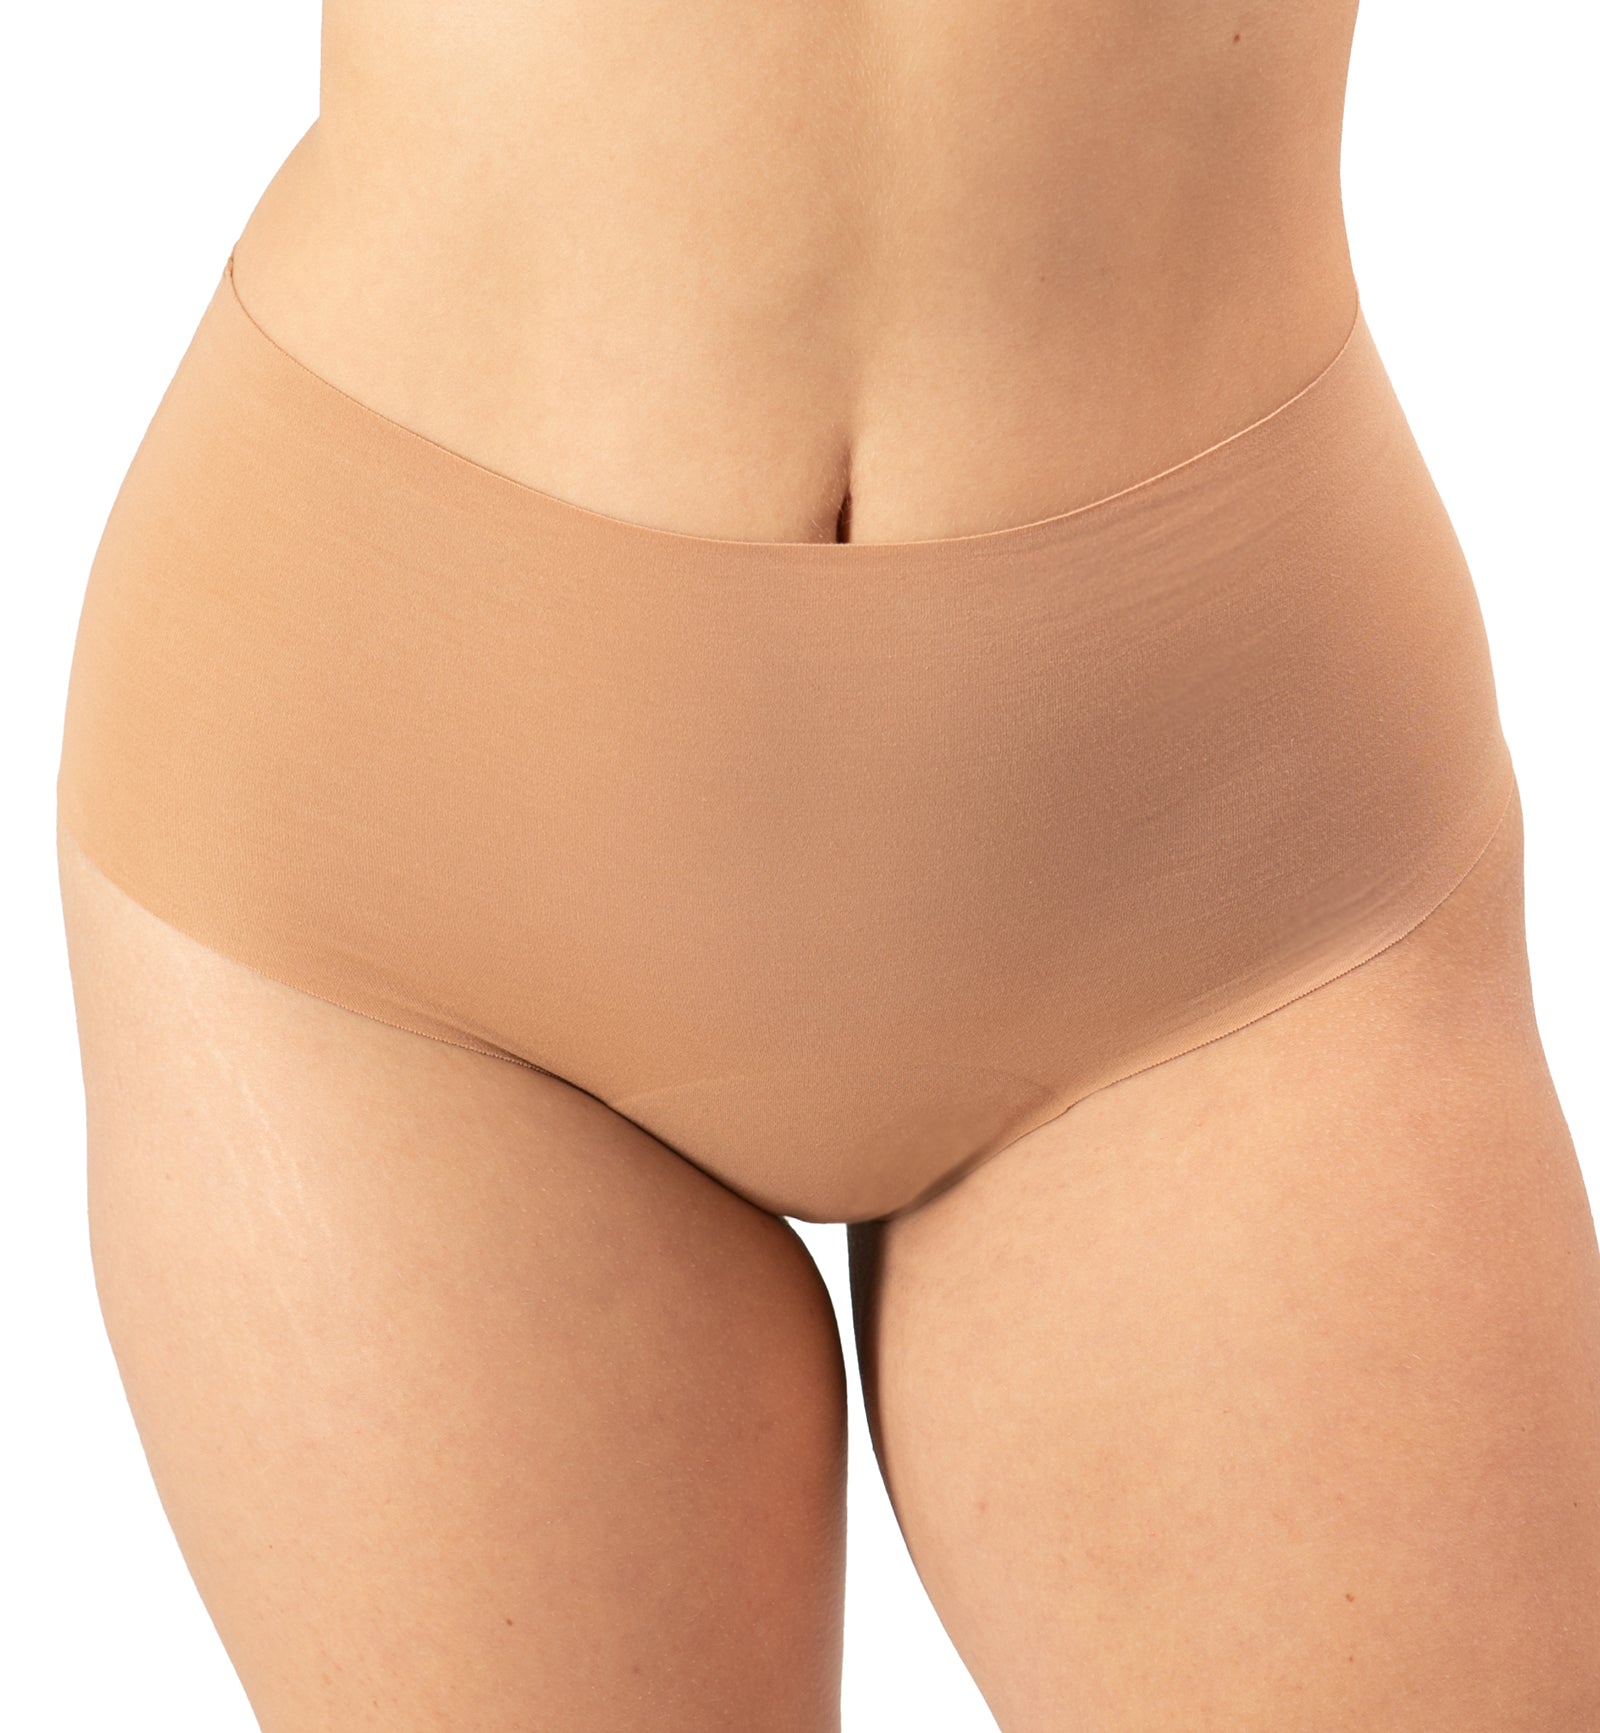 Panty Promise High Waist Hipster,XS,Sand - Sand,XS